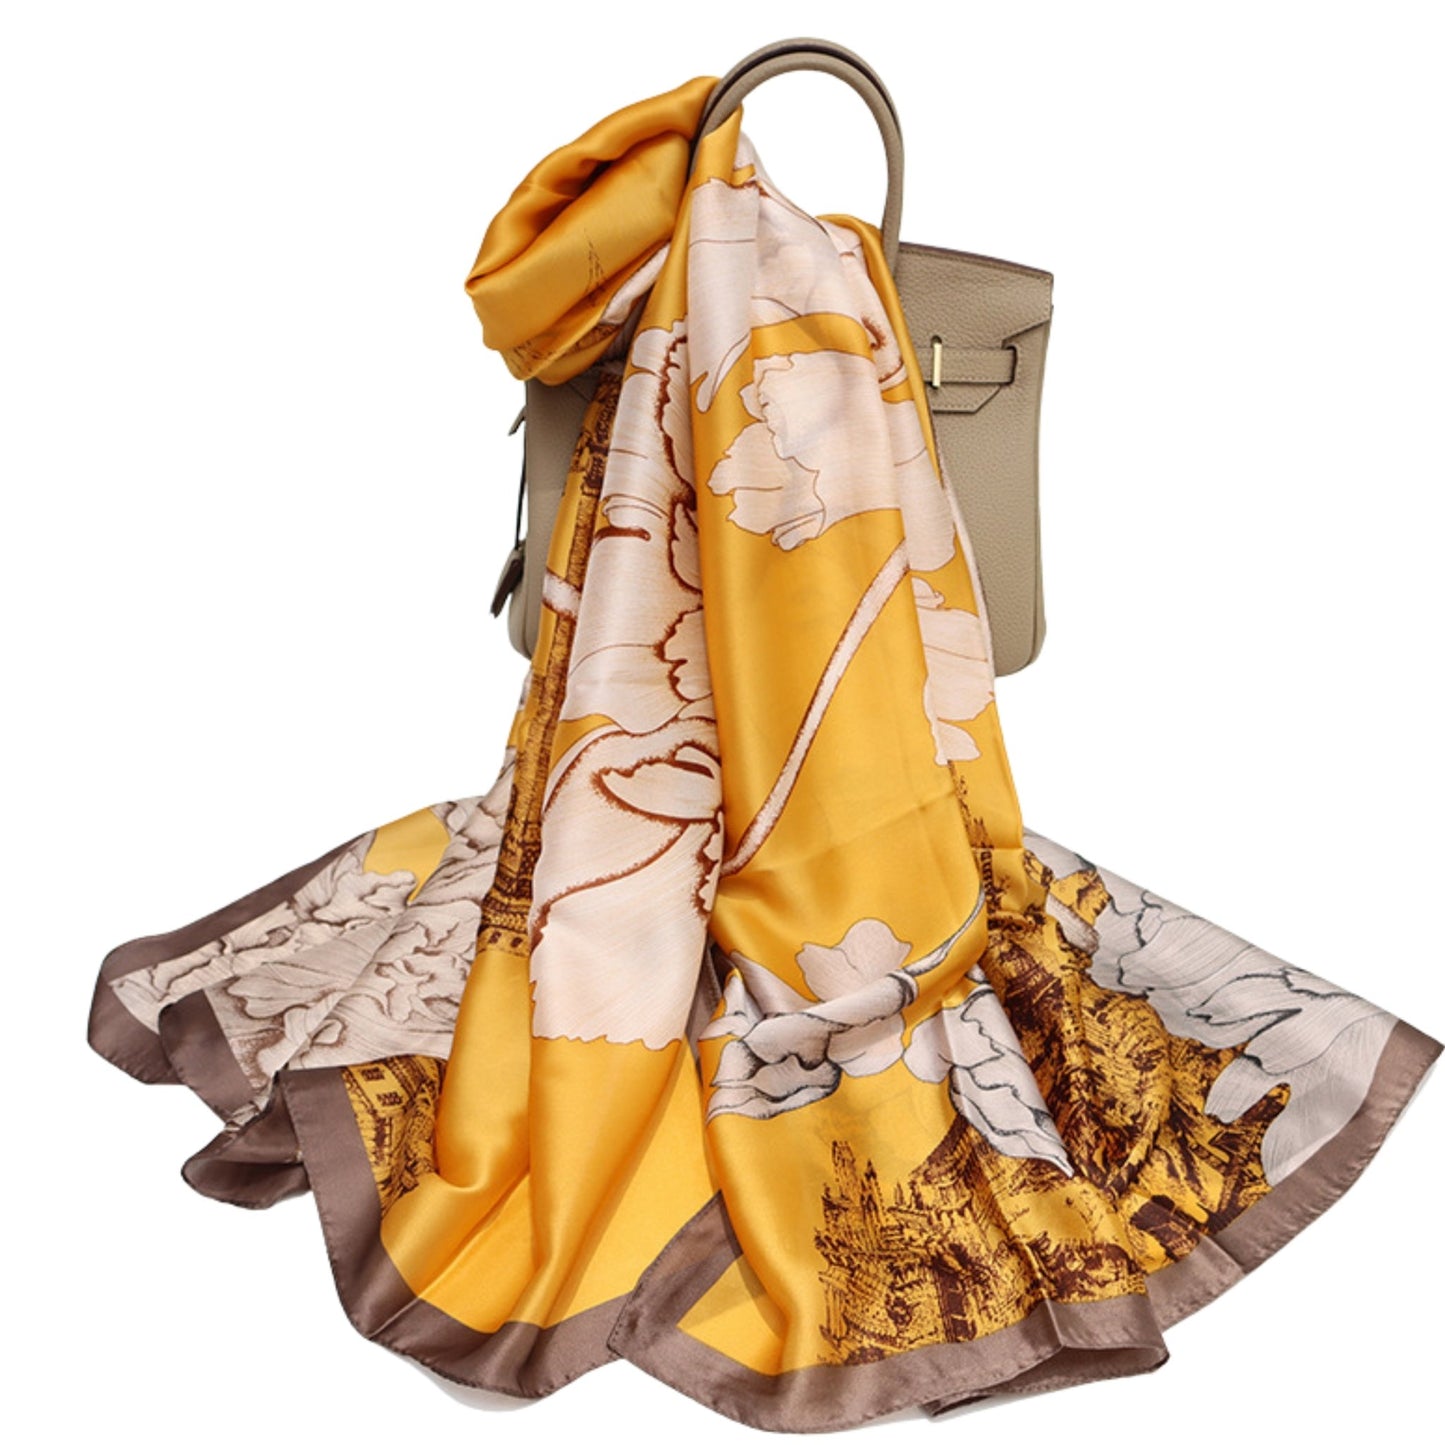 Chic and Elegant Scarves - BloomBliss.com